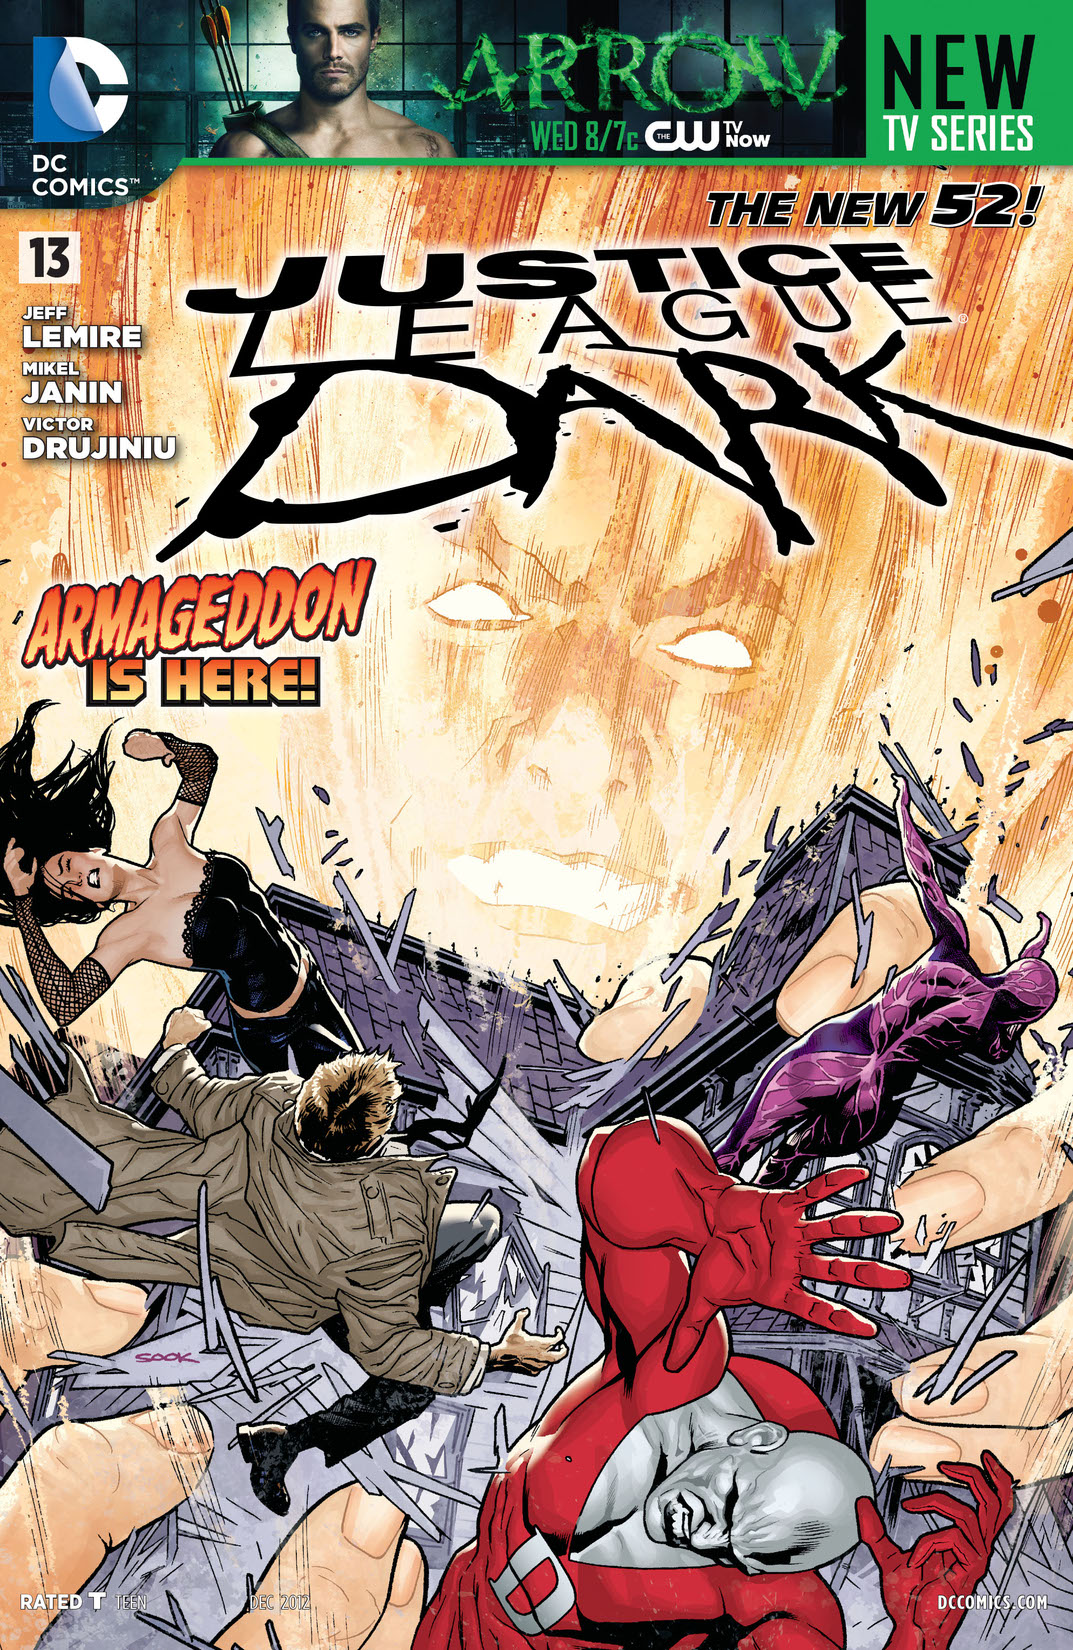 Justice League Dark (2011-) #13 preview images